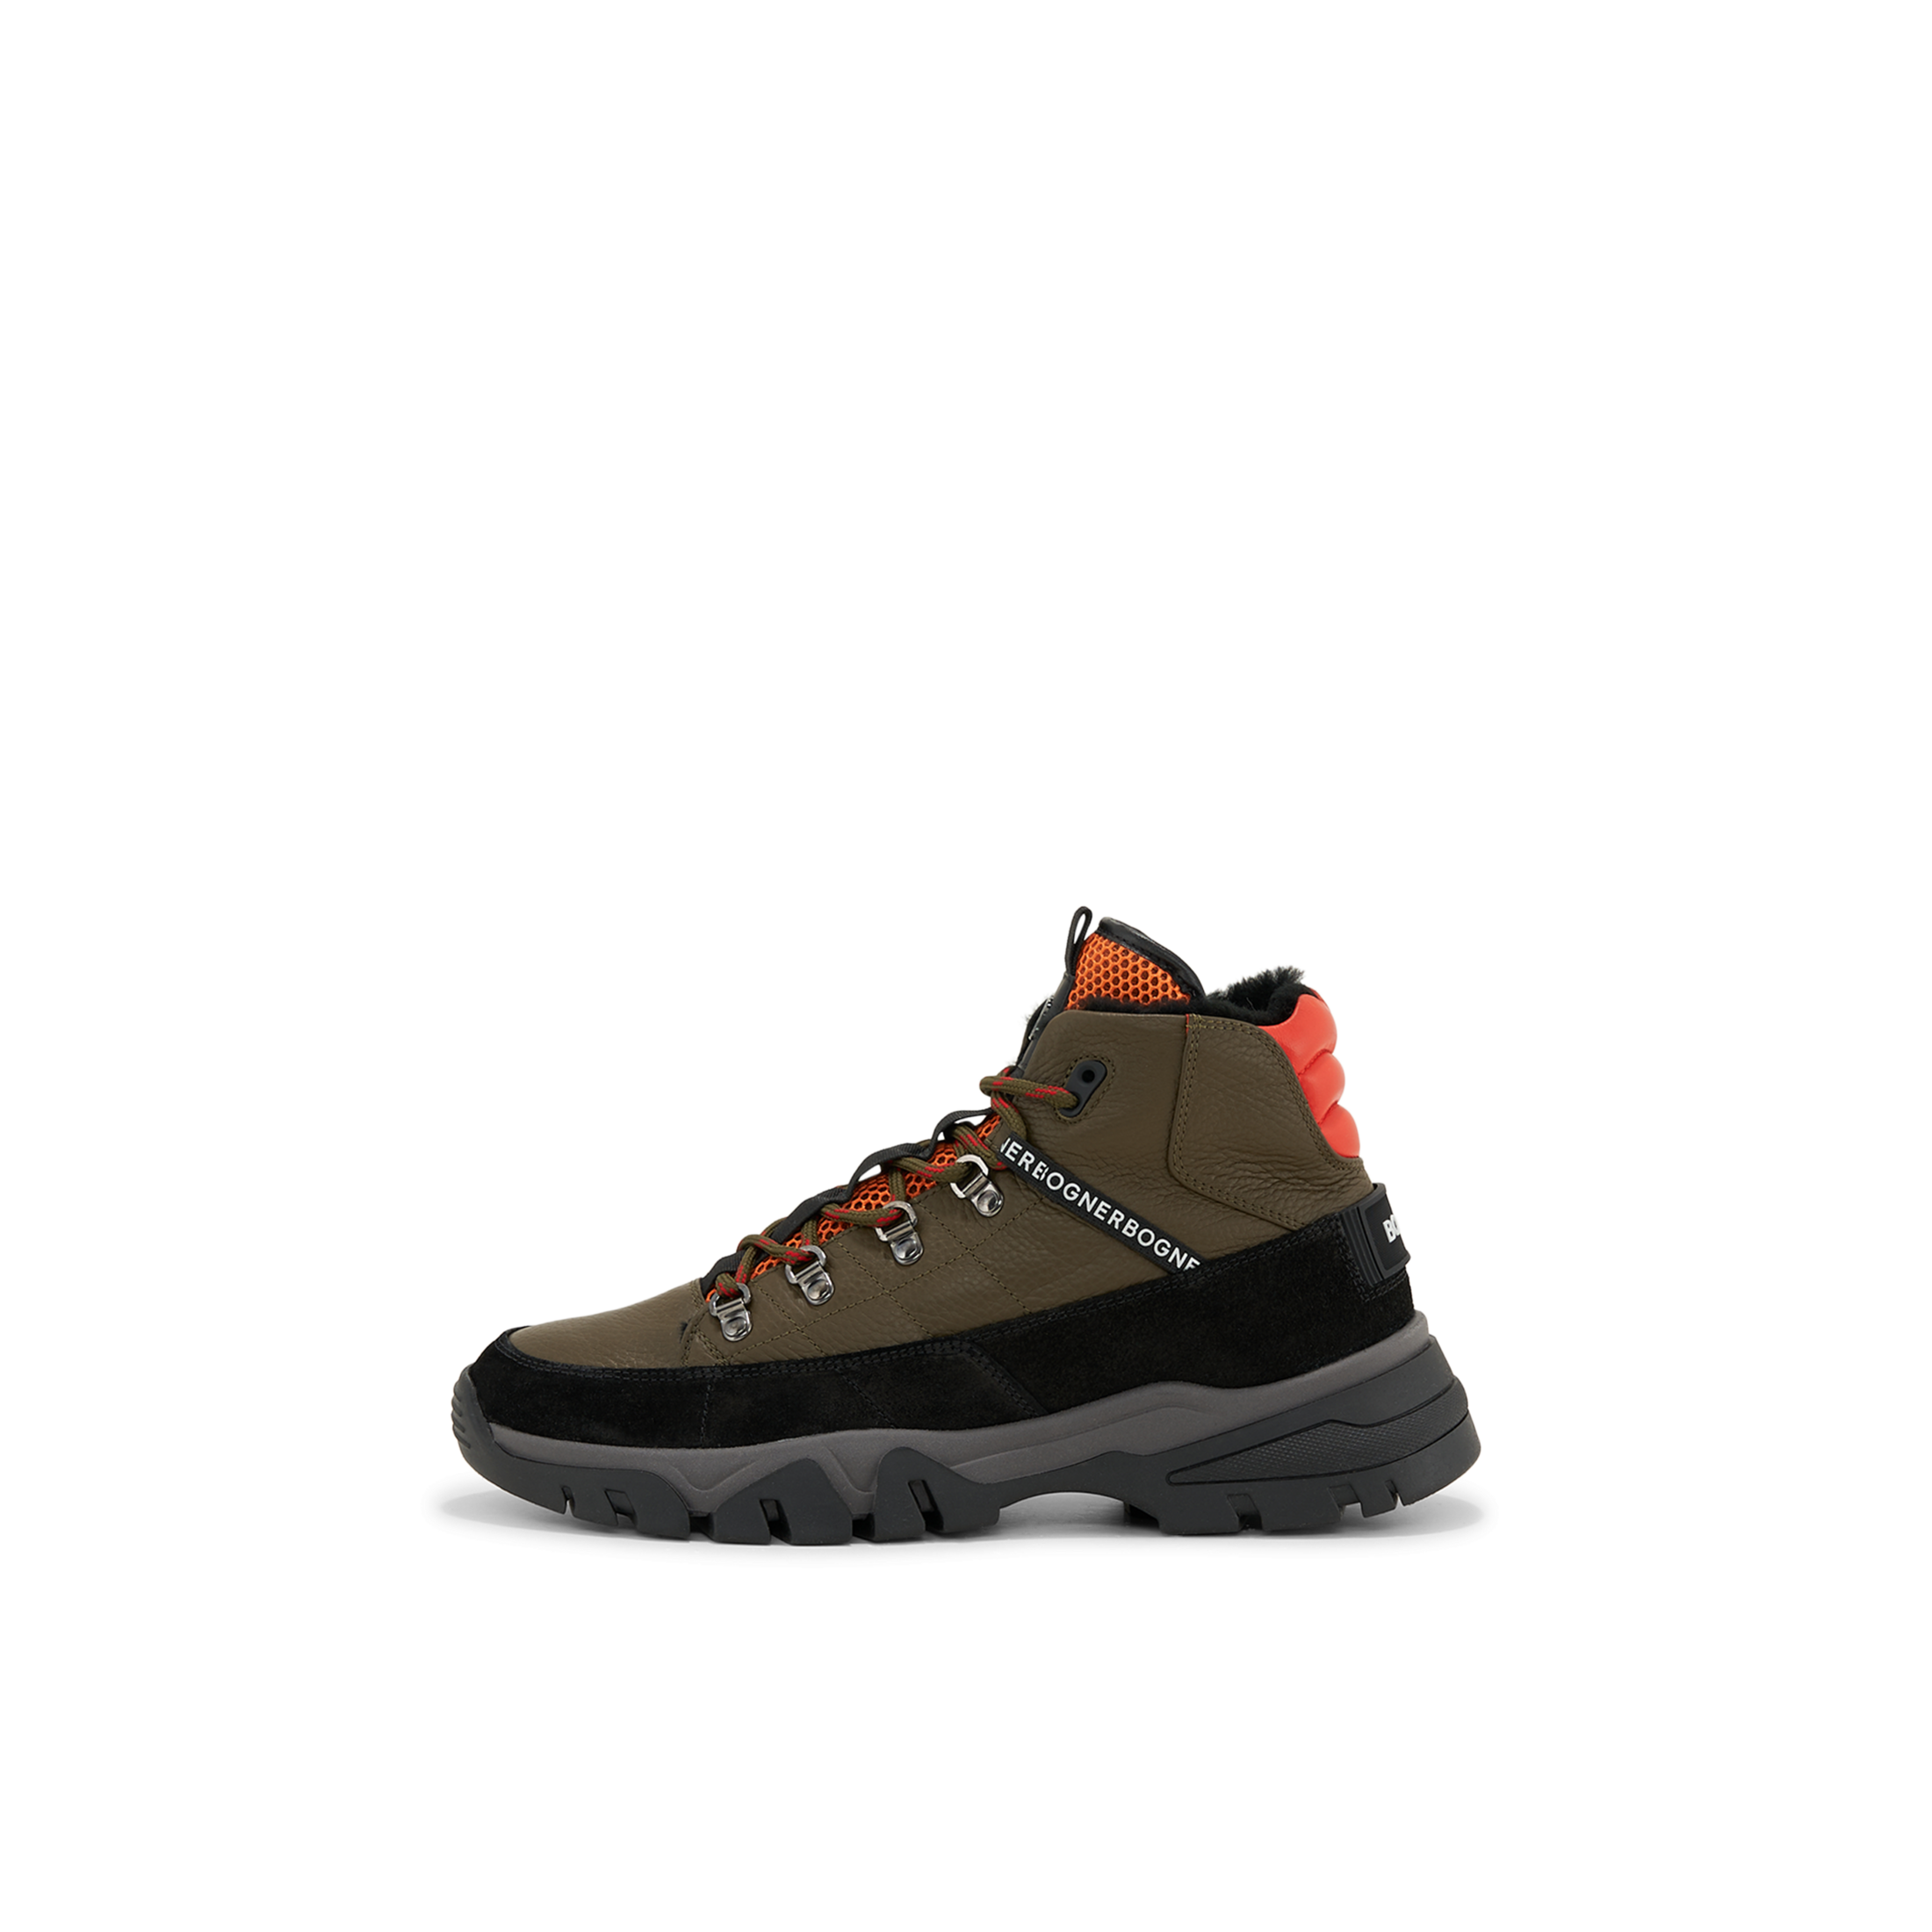 BOGNER Copper Mountain low boot sneakers for men - Black/Olive - US 13 product